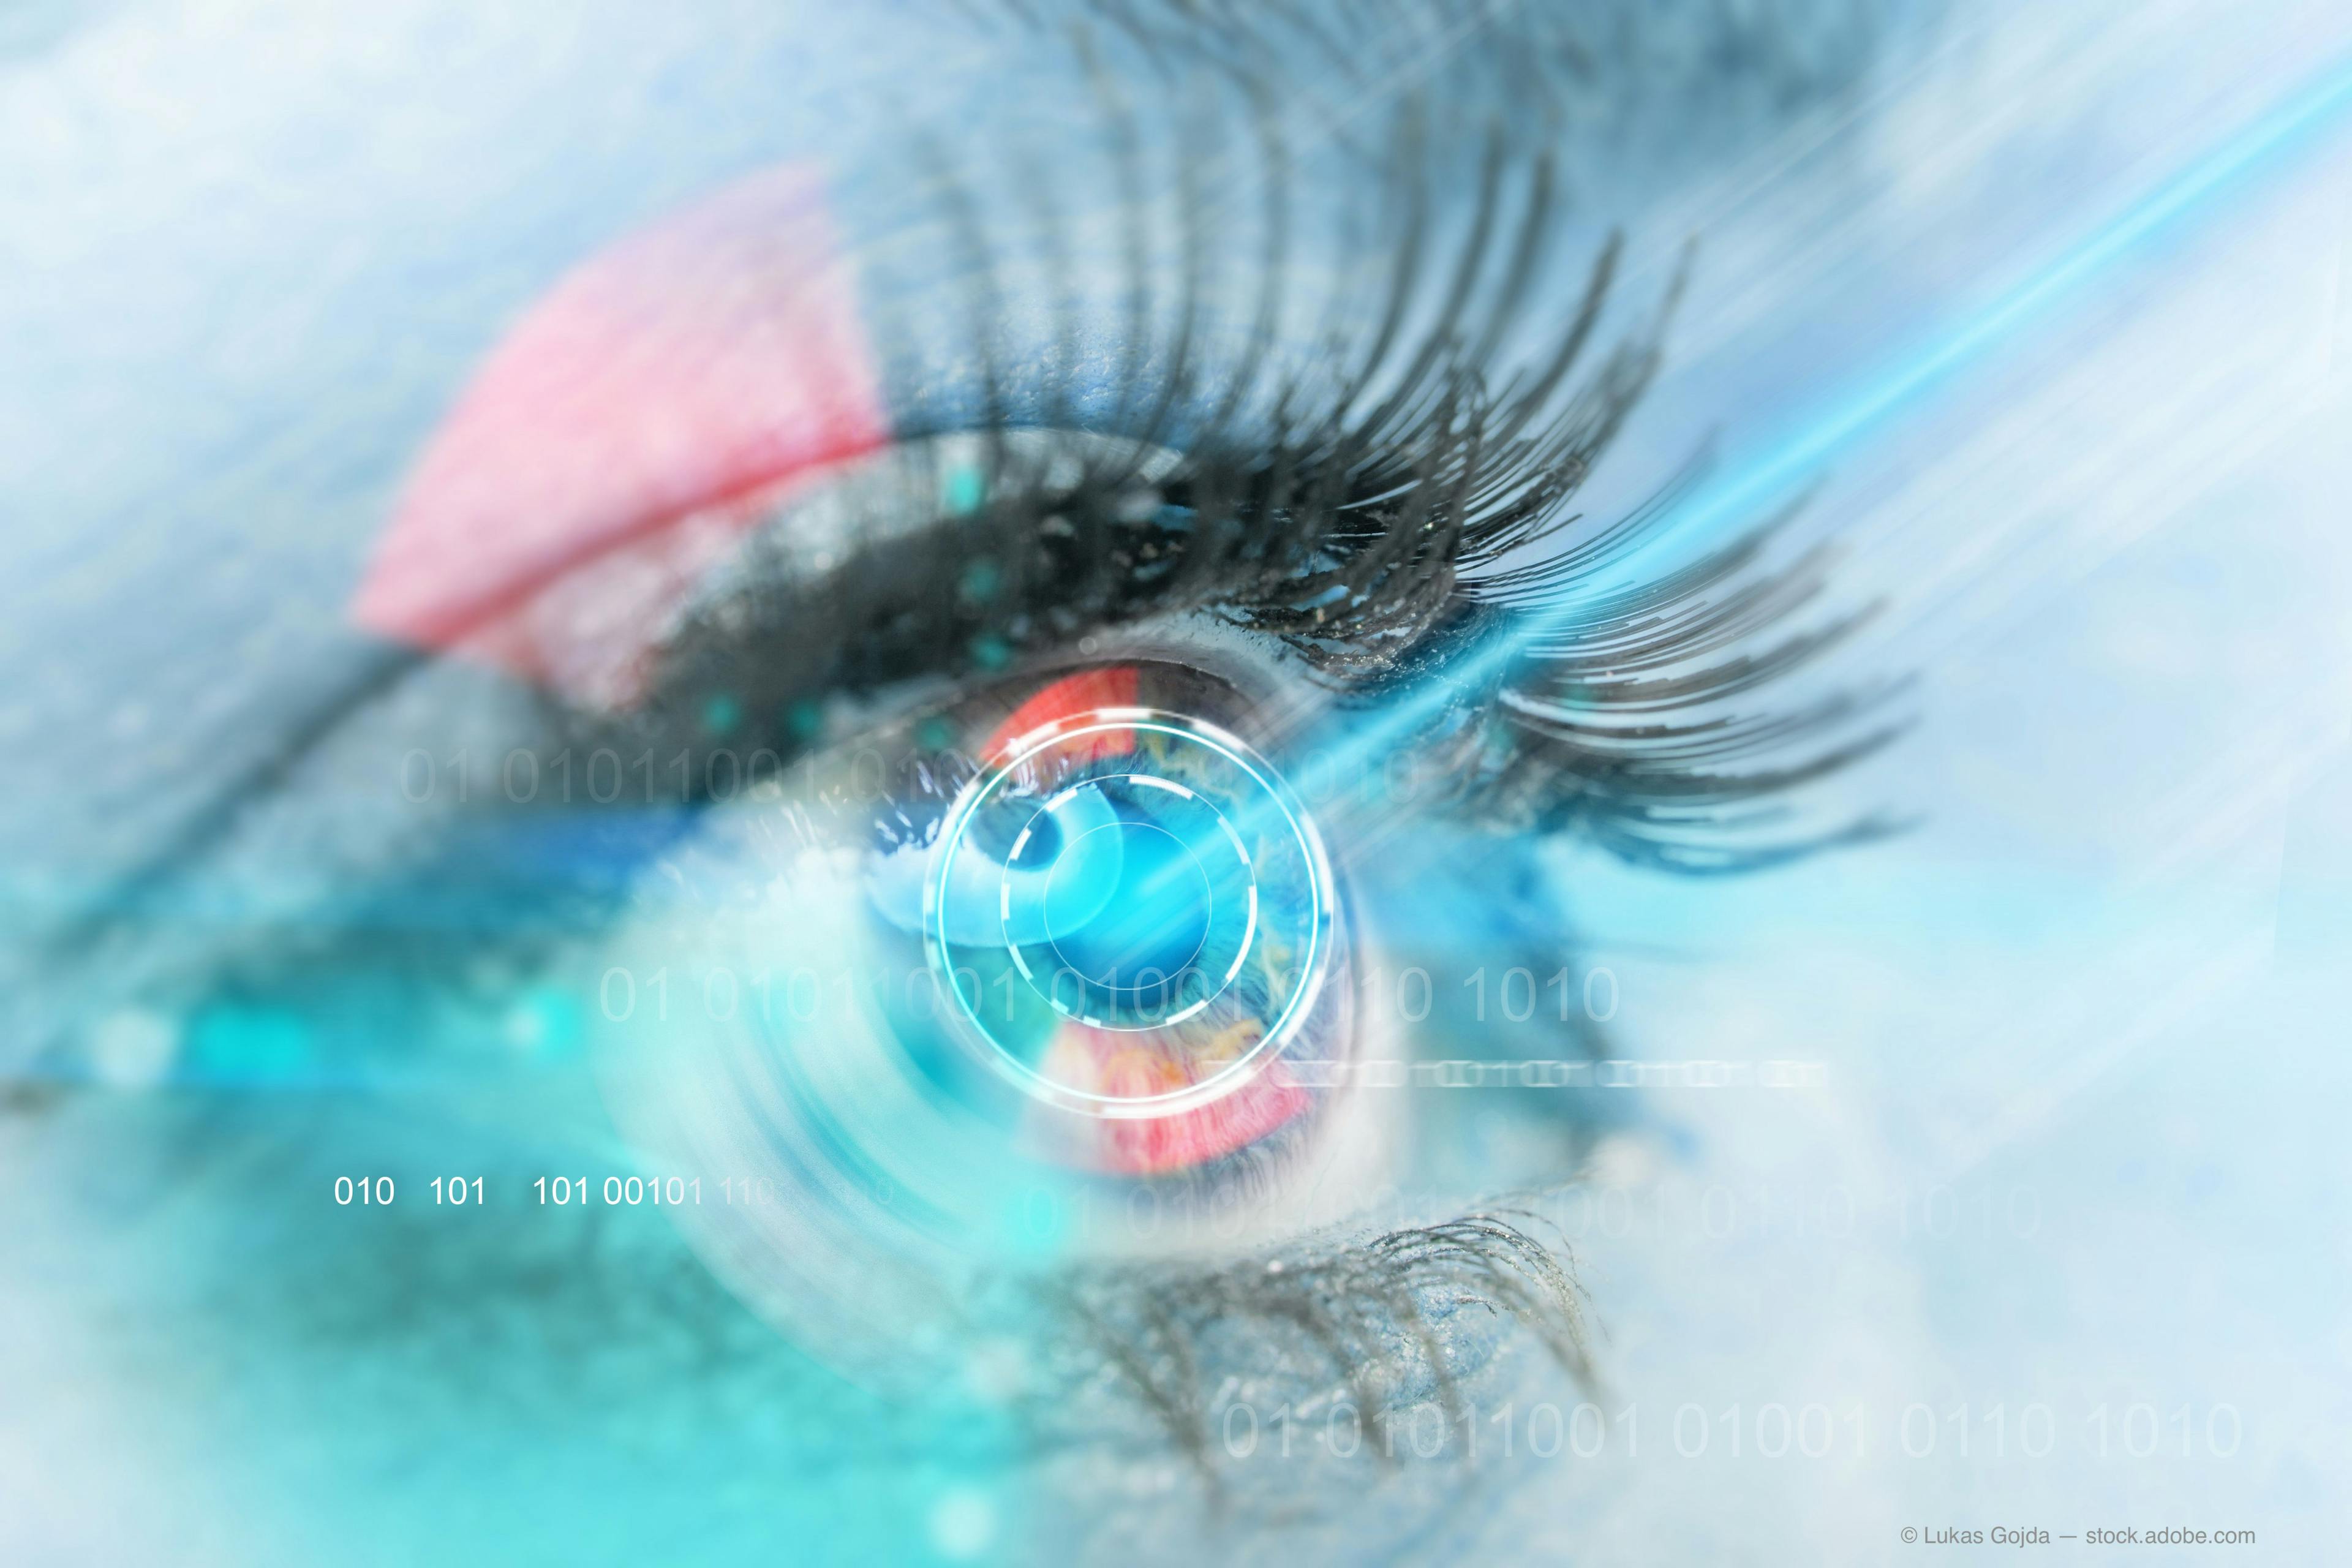 Touchless technology could enable early detection, treatment of eye diseases that cause blindness 